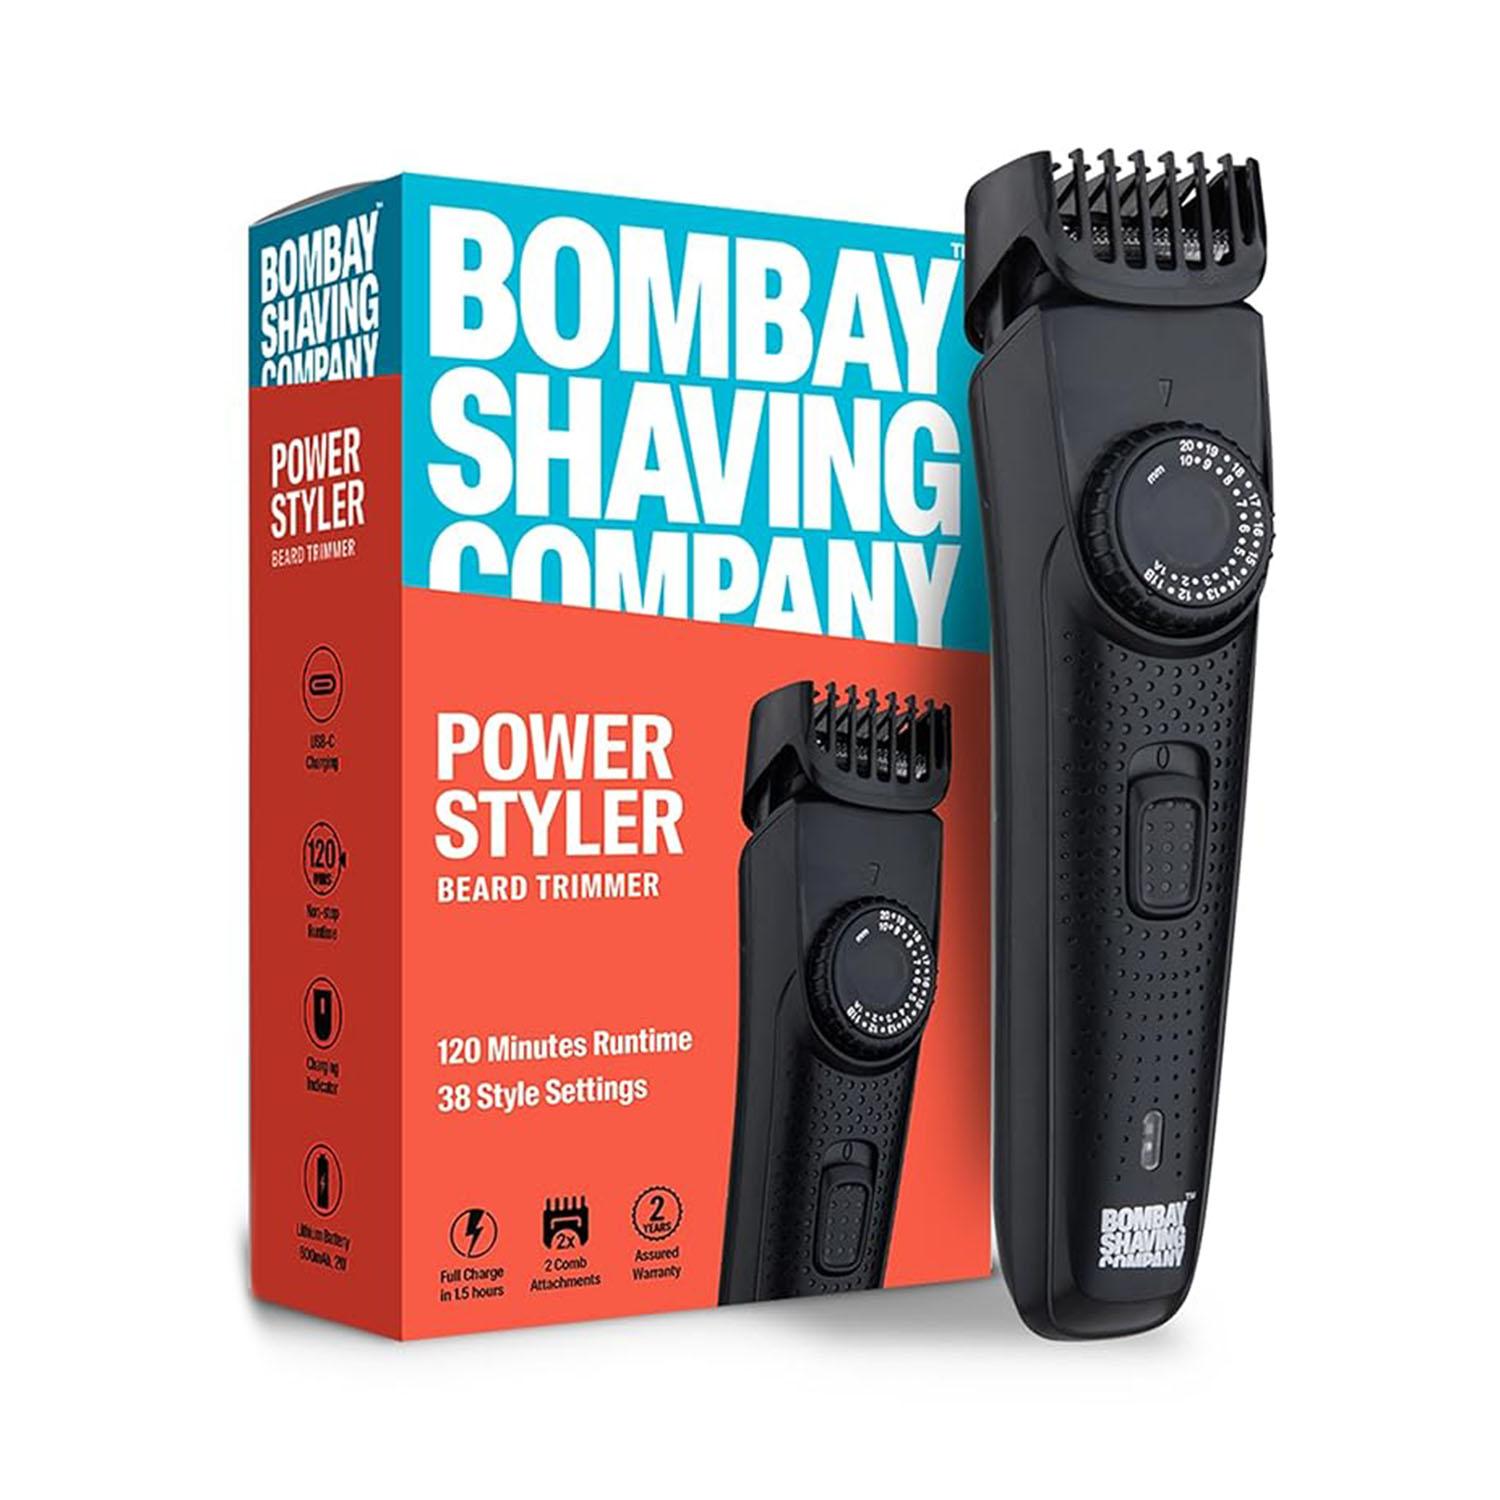 Bombay Shaving Company | Bombay Shaving Company Beard Trimmer For Men with USB Fast Charging - Black (160 g)